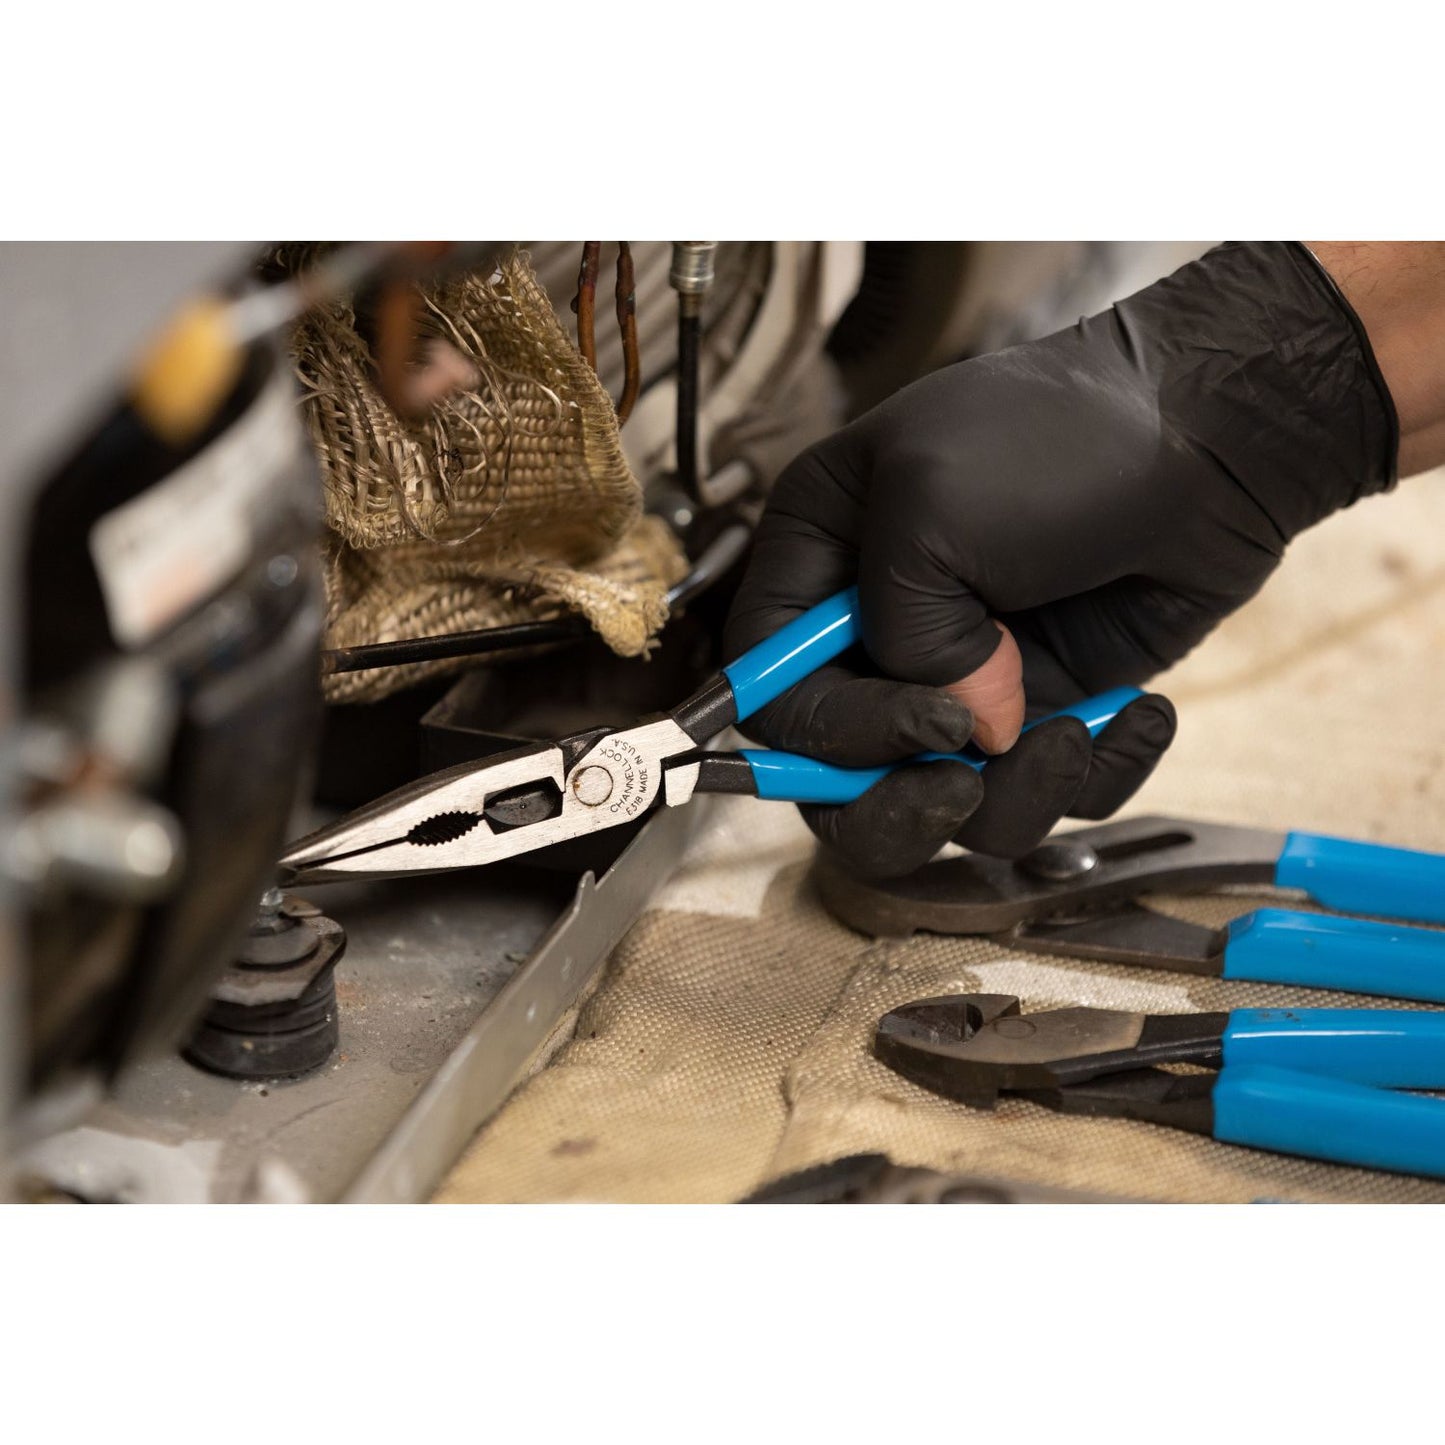 E318 - 8" XLT Combination Long Nose Pliers with Cutter